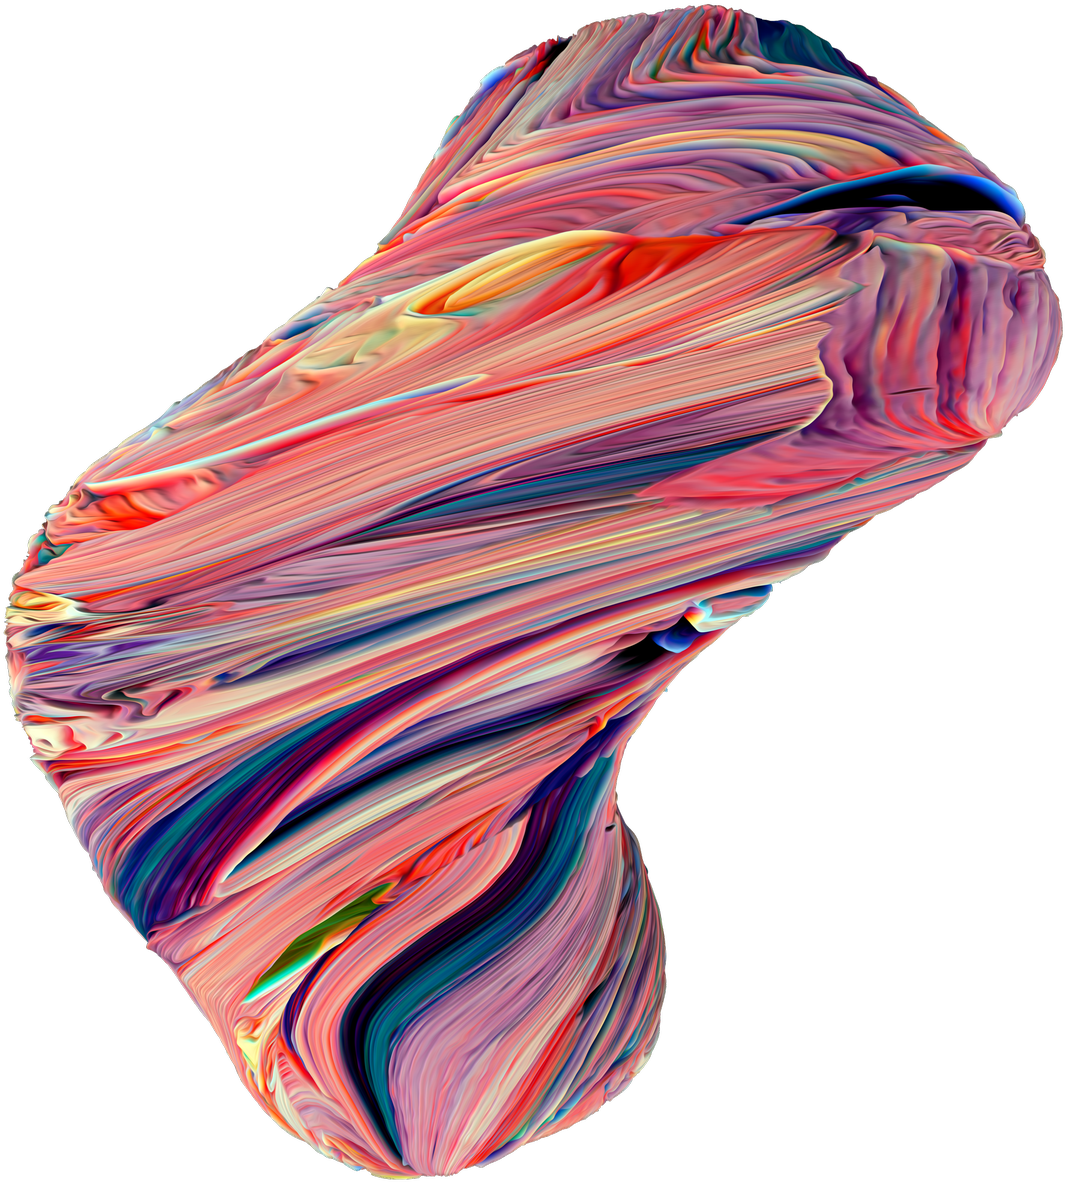 A Colorful Swirly Object On A Black Background